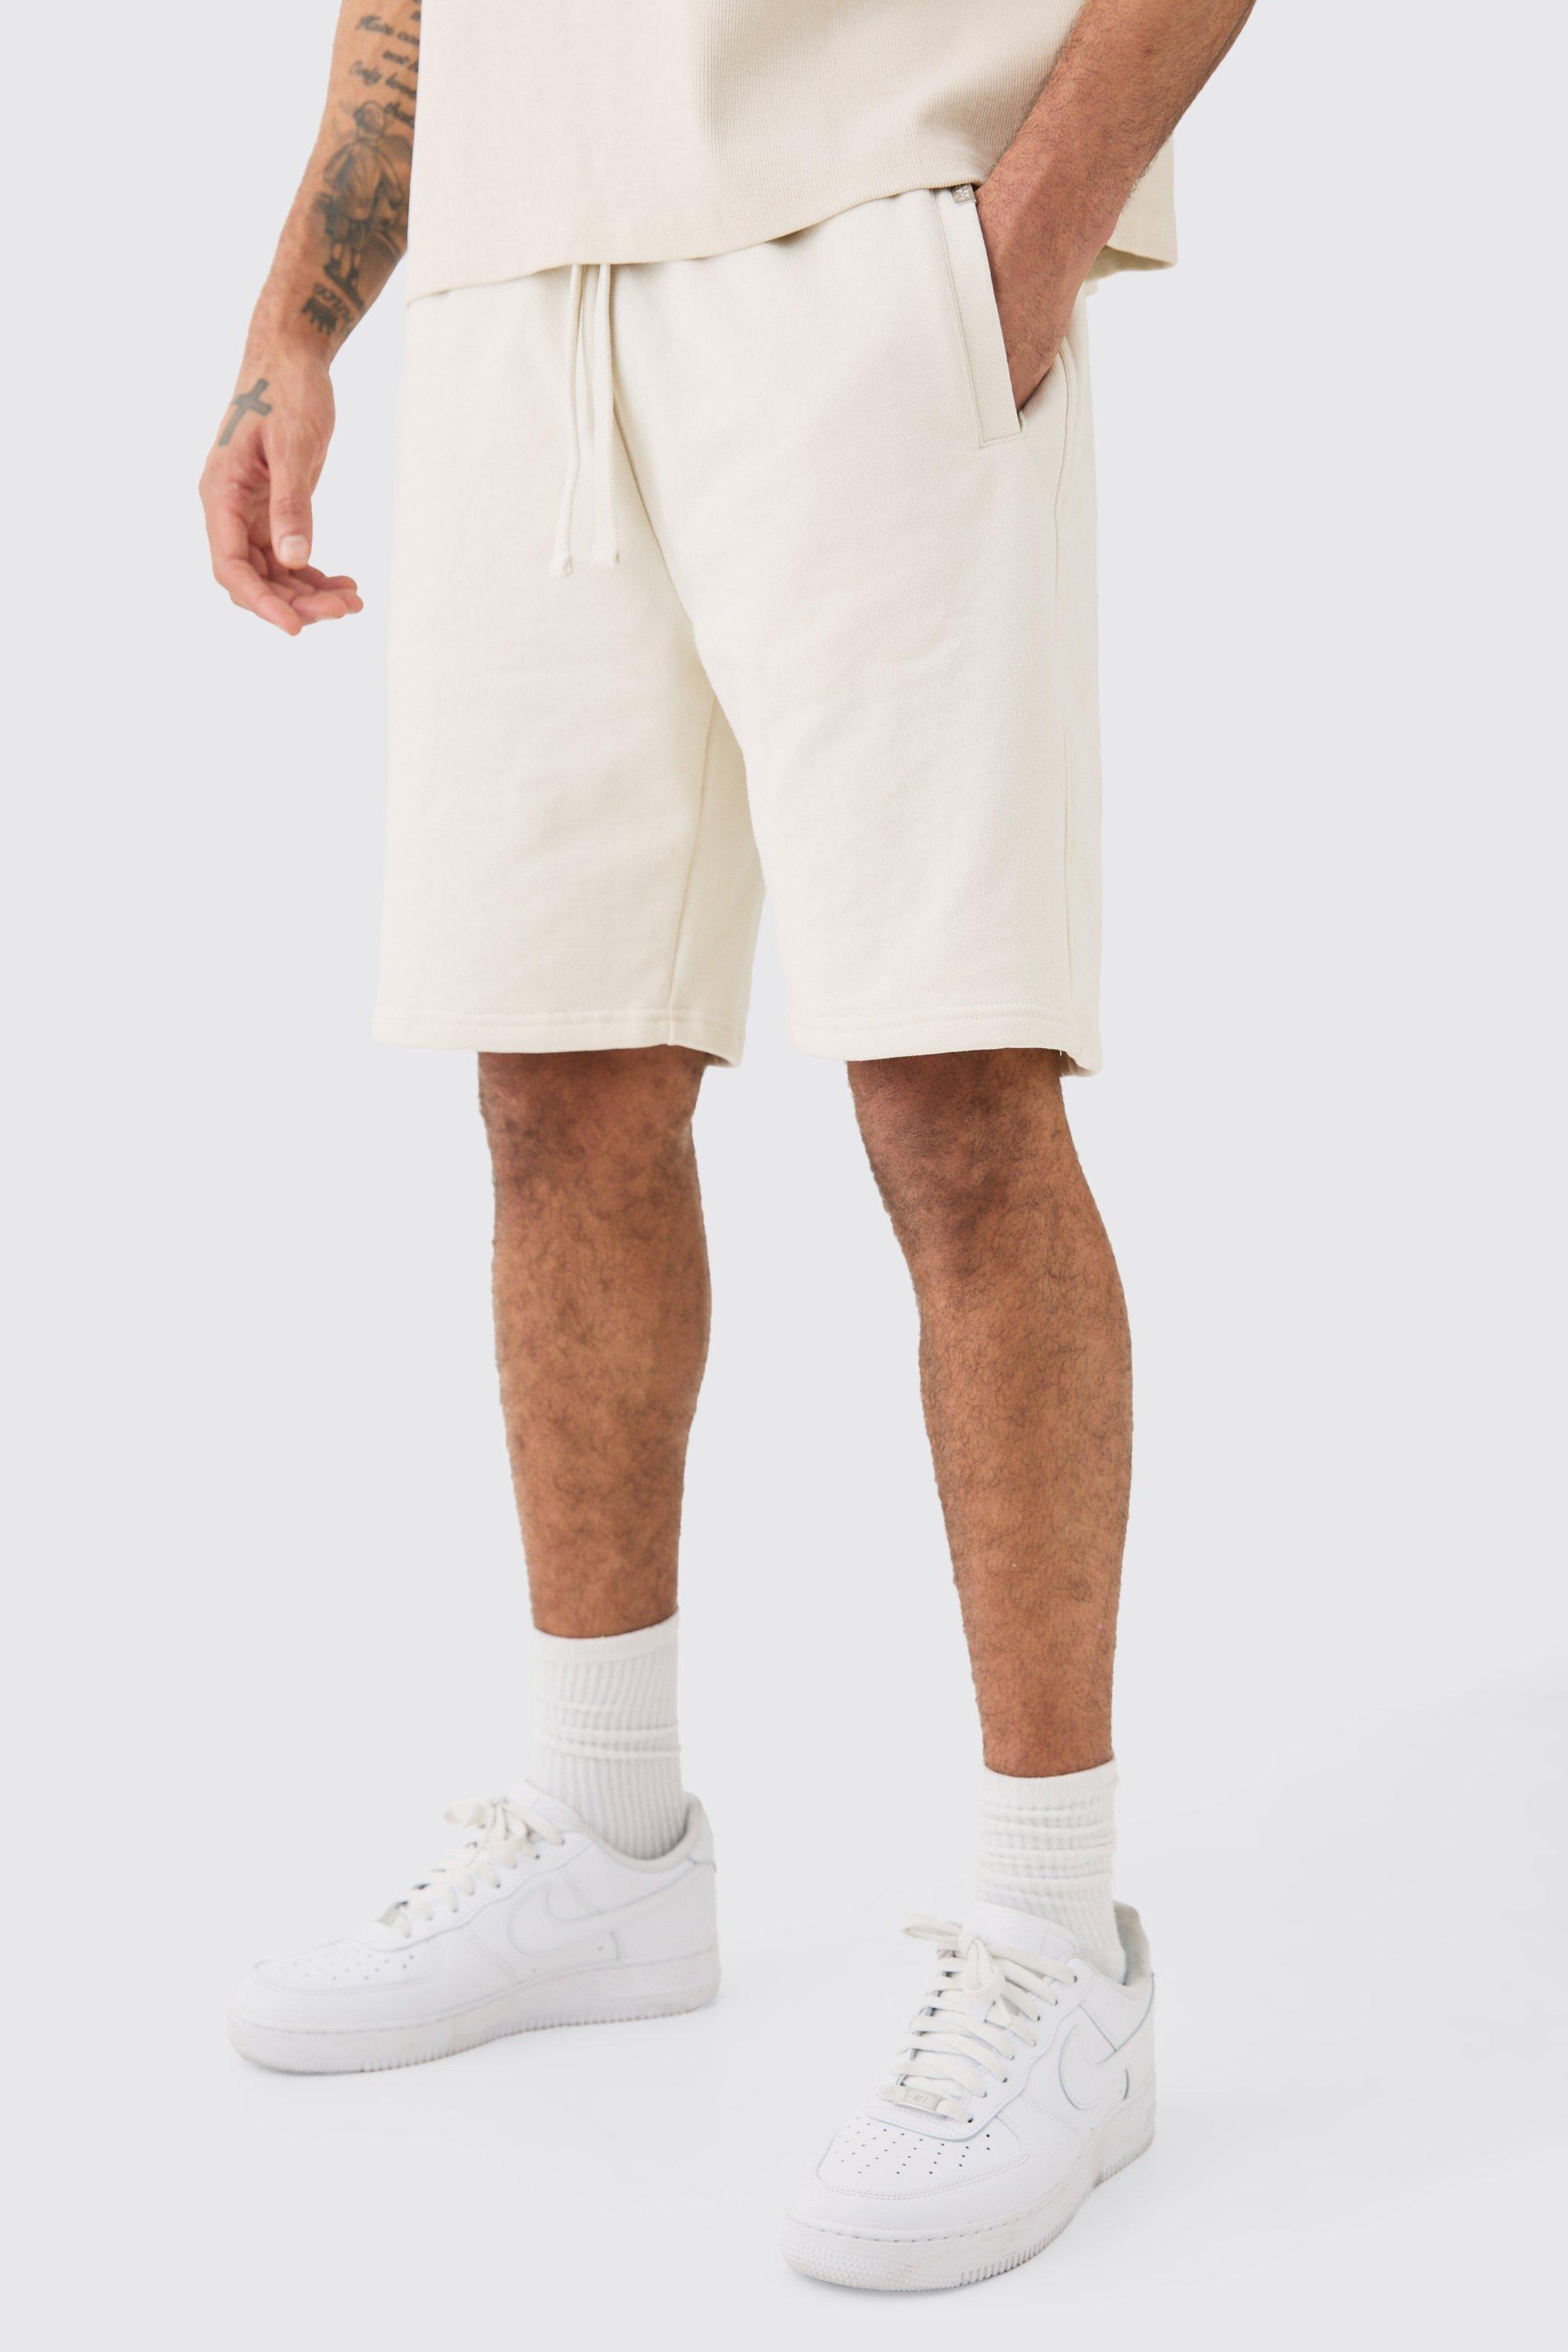 Image of Relaxed Fit Mid Length Heavyweight Short, Cream